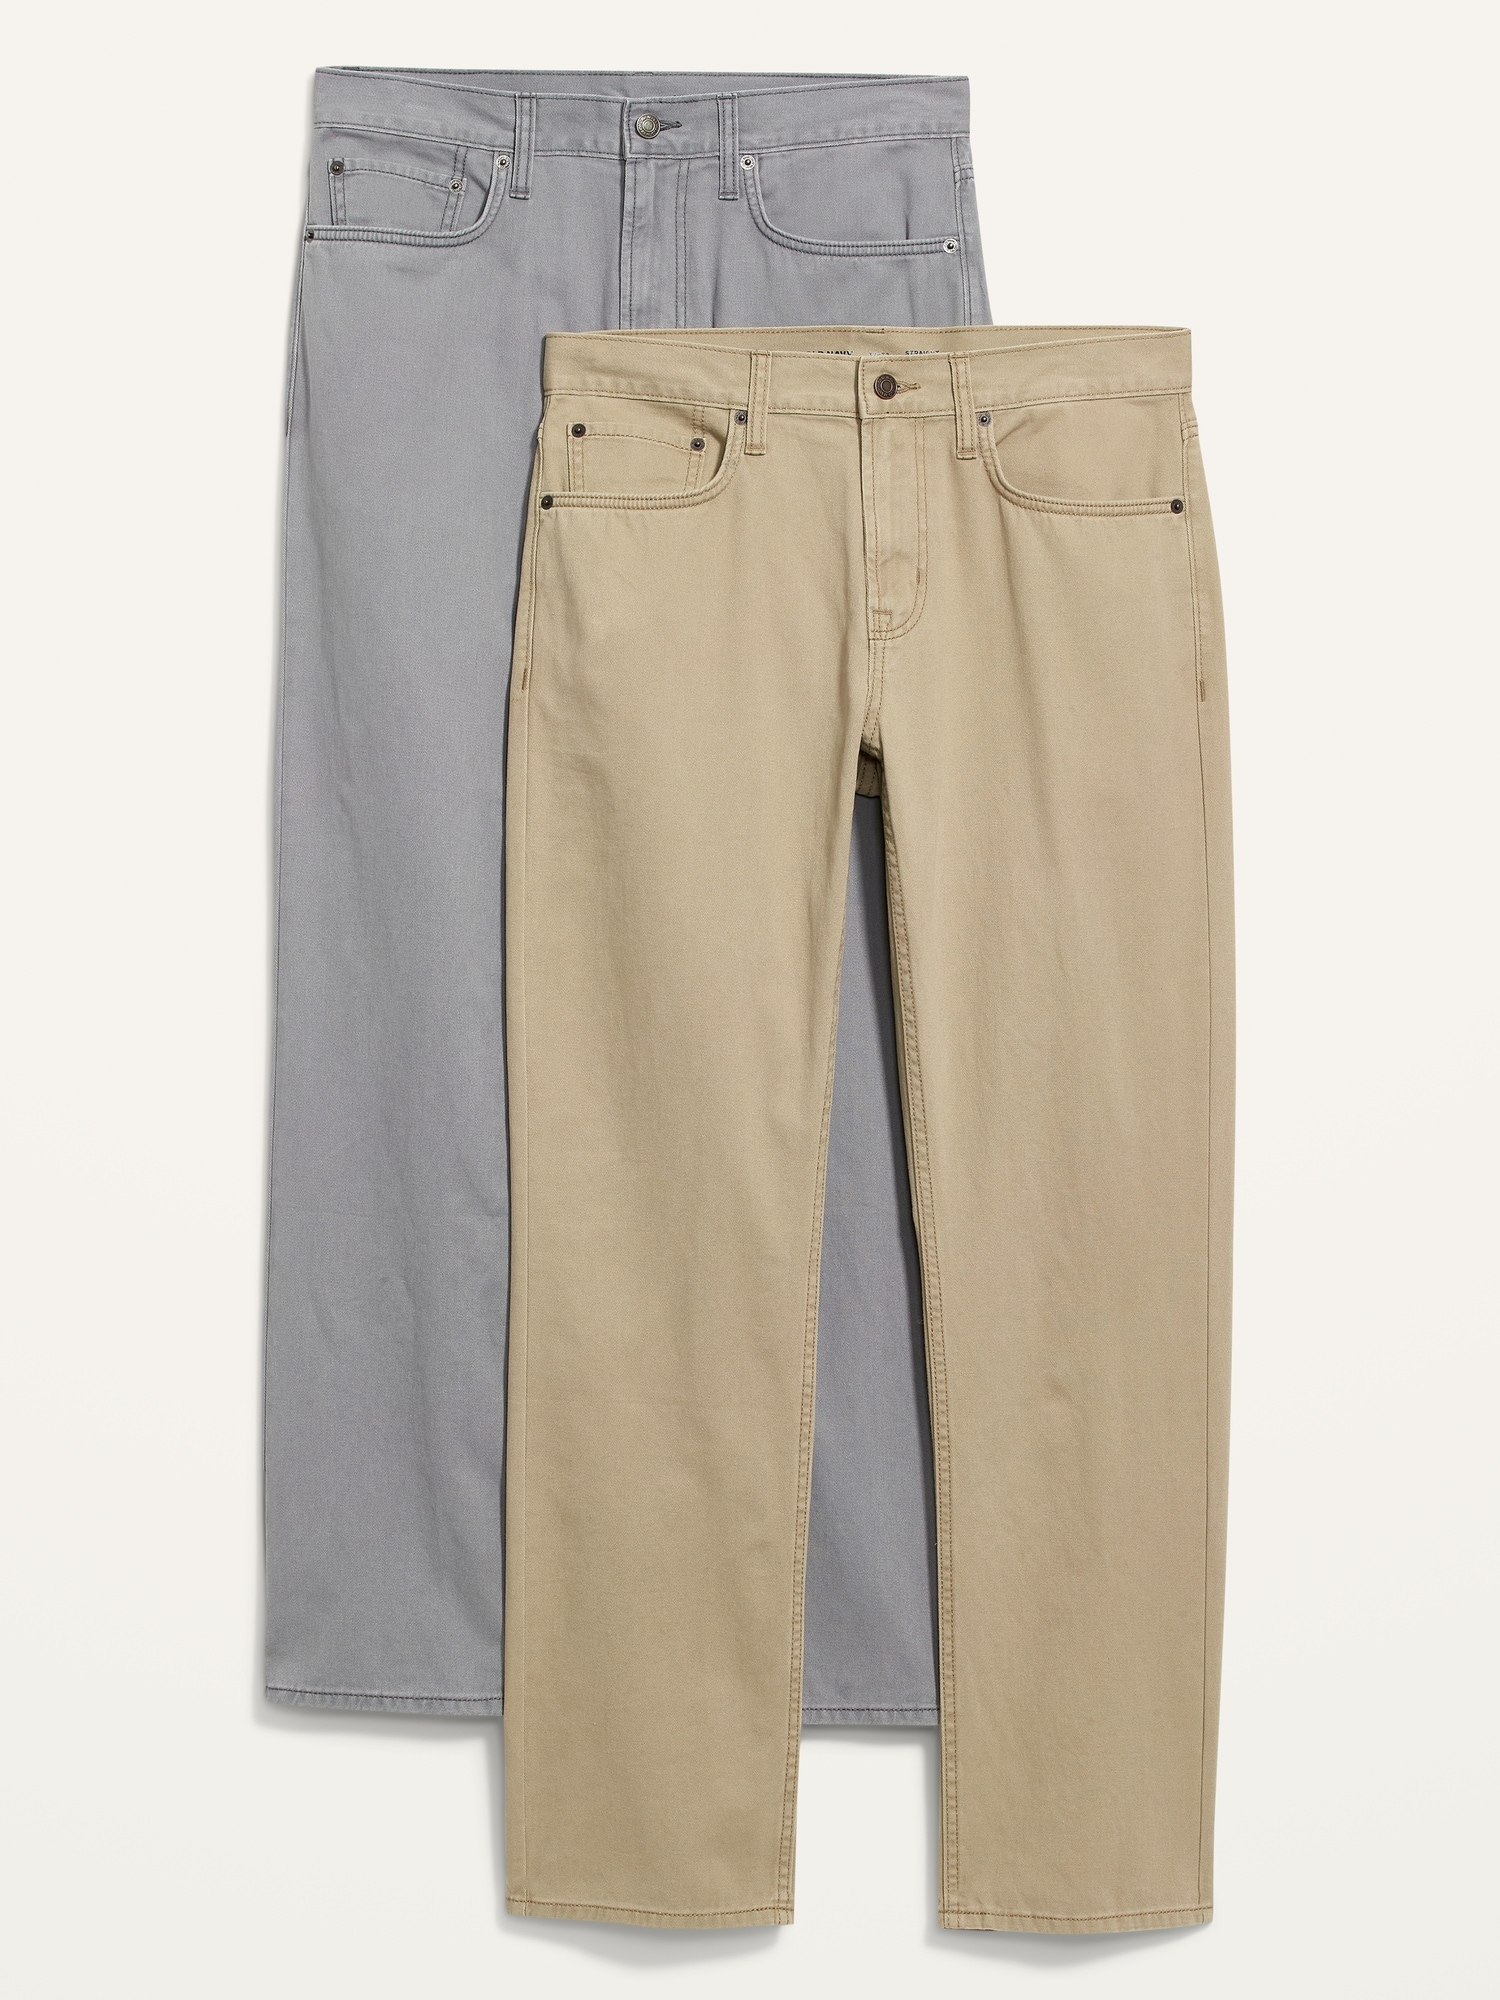 Old Navy Wow Straight Non-Stretch Five-Pocket Pants 2-Pack for Men multi. 1